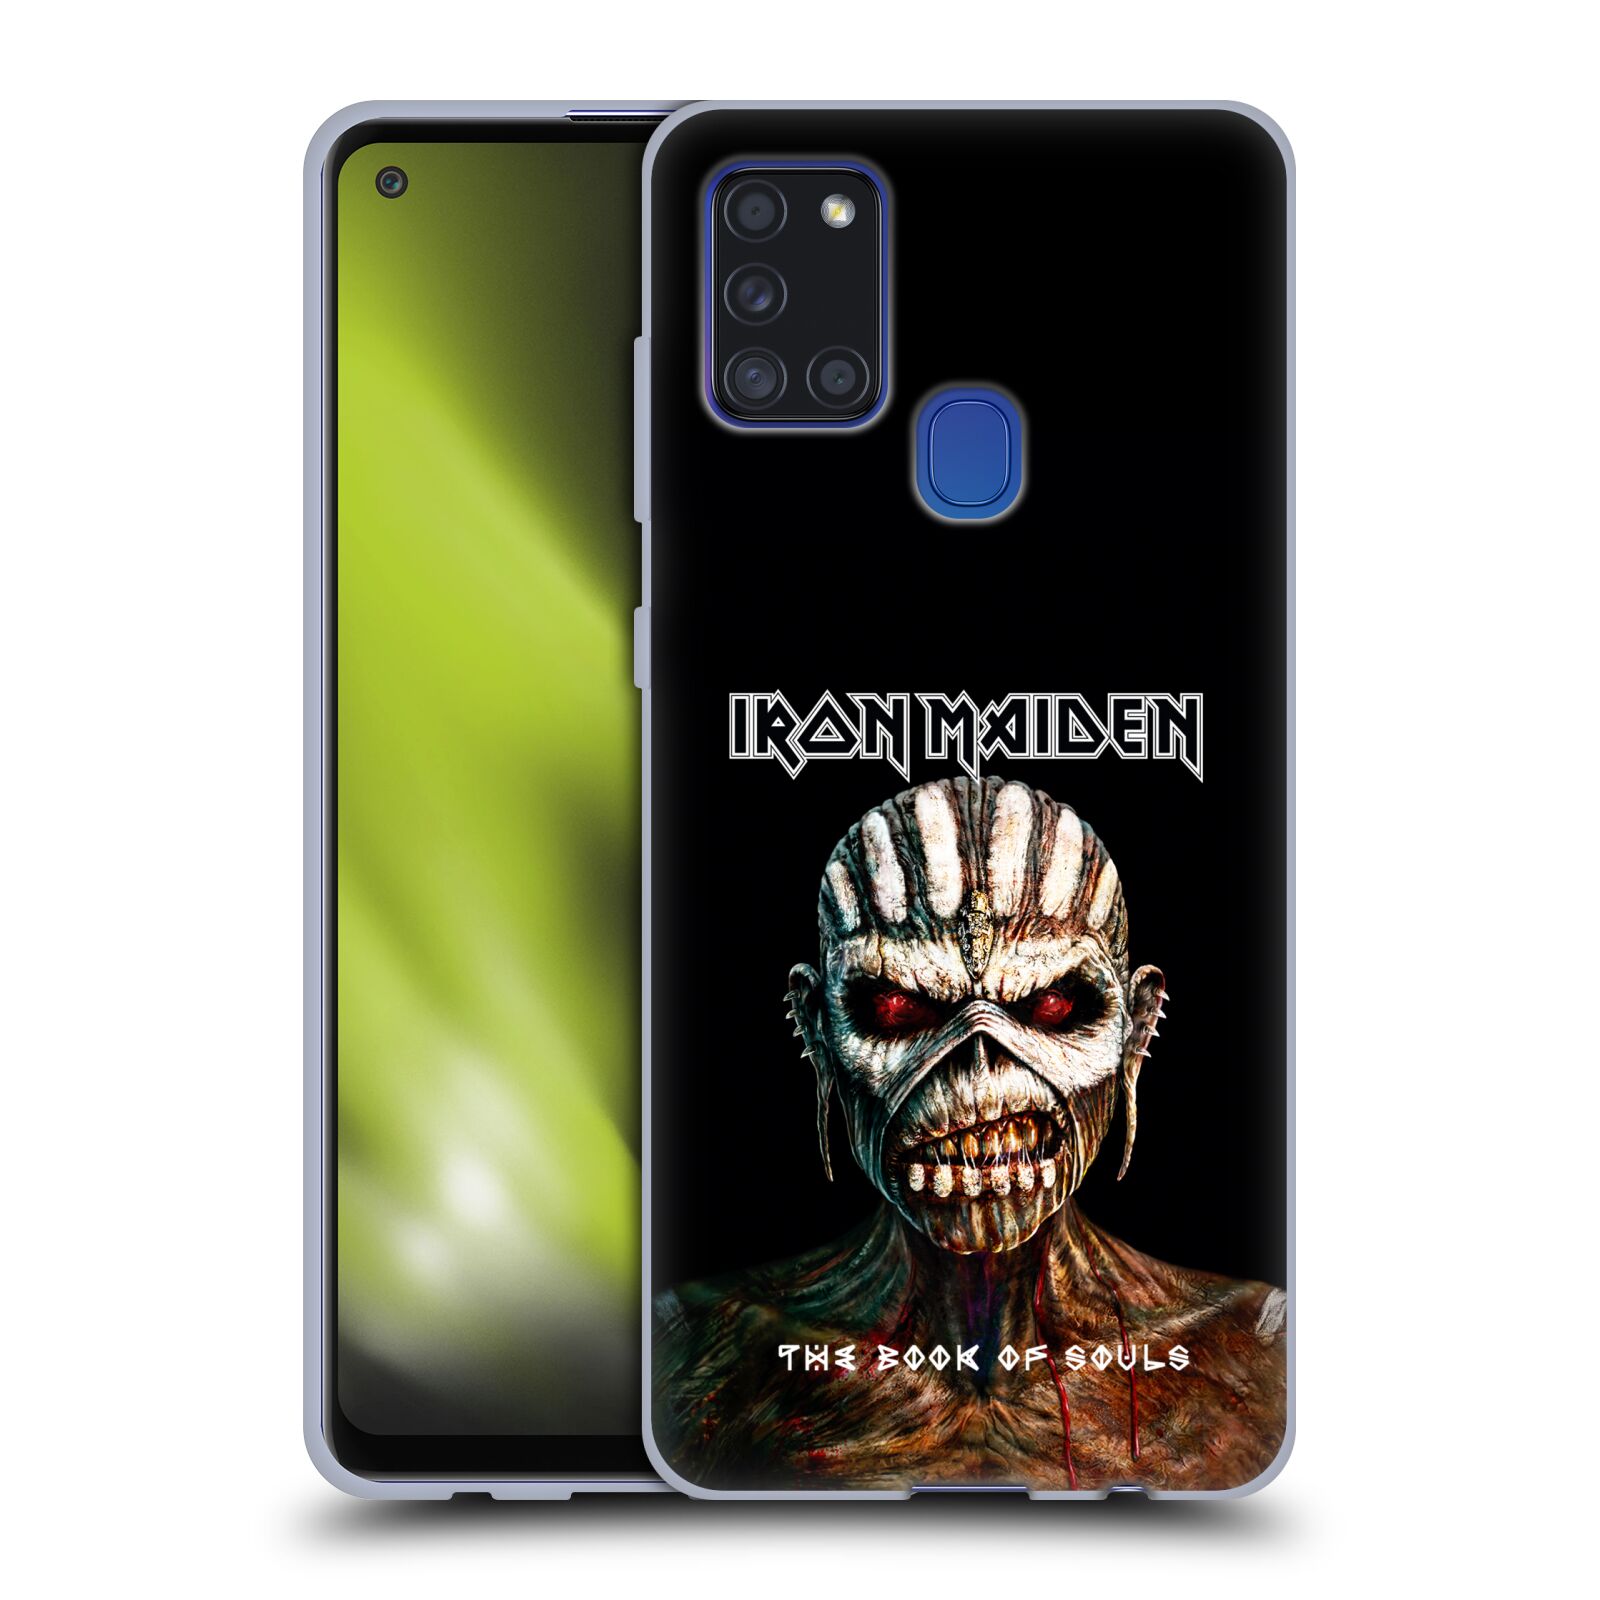 Silikonové pouzdro na mobil Samsung Galaxy A21s - Head Case - Iron Maiden - The Book Of Souls (Silikonový kryt, obal, pouzdro na mobilní telefon Samsung Galaxy A21s SM-A217F s motivem Iron Maiden - The Book Of Souls)